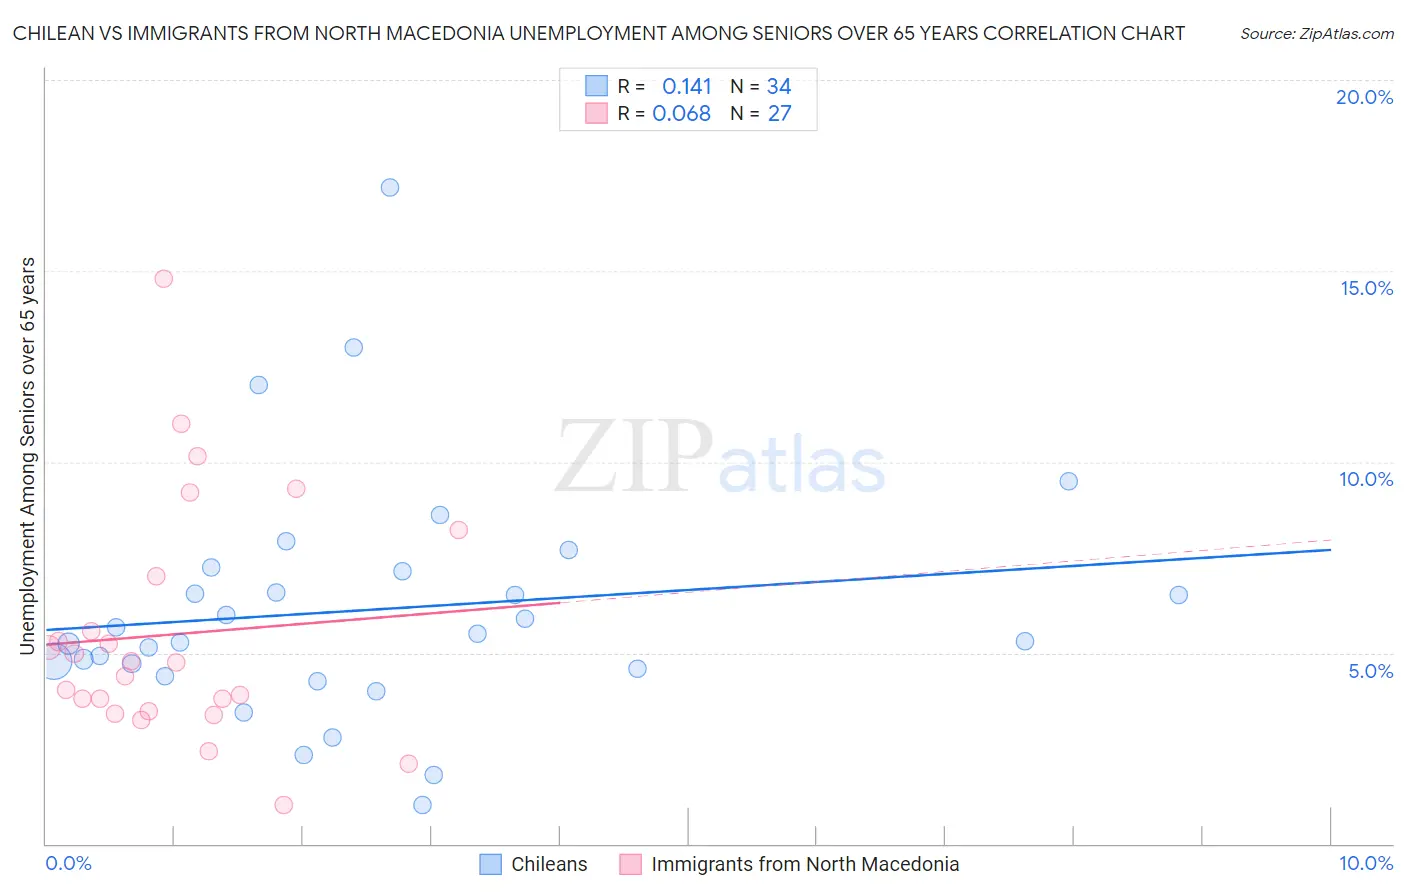 Chilean vs Immigrants from North Macedonia Unemployment Among Seniors over 65 years